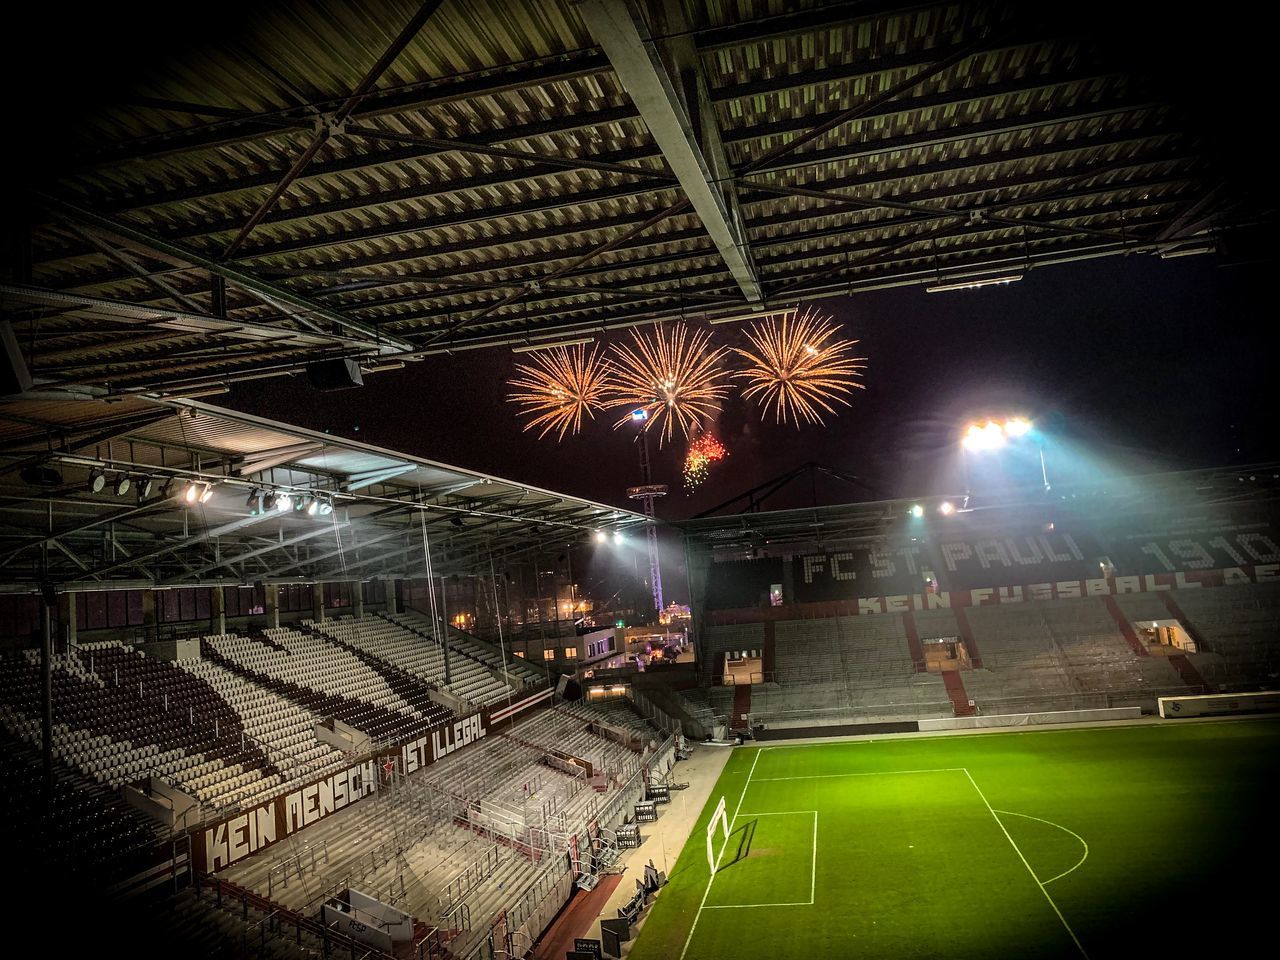 sport, night, illuminated, stadium, architecture, ceiling, lighting equipment, team sport, arts culture and entertainment, soccer, playing field, low angle view, incidental people, group of people, competition, soccer field, indoors, real people, light, spectator, floodlit